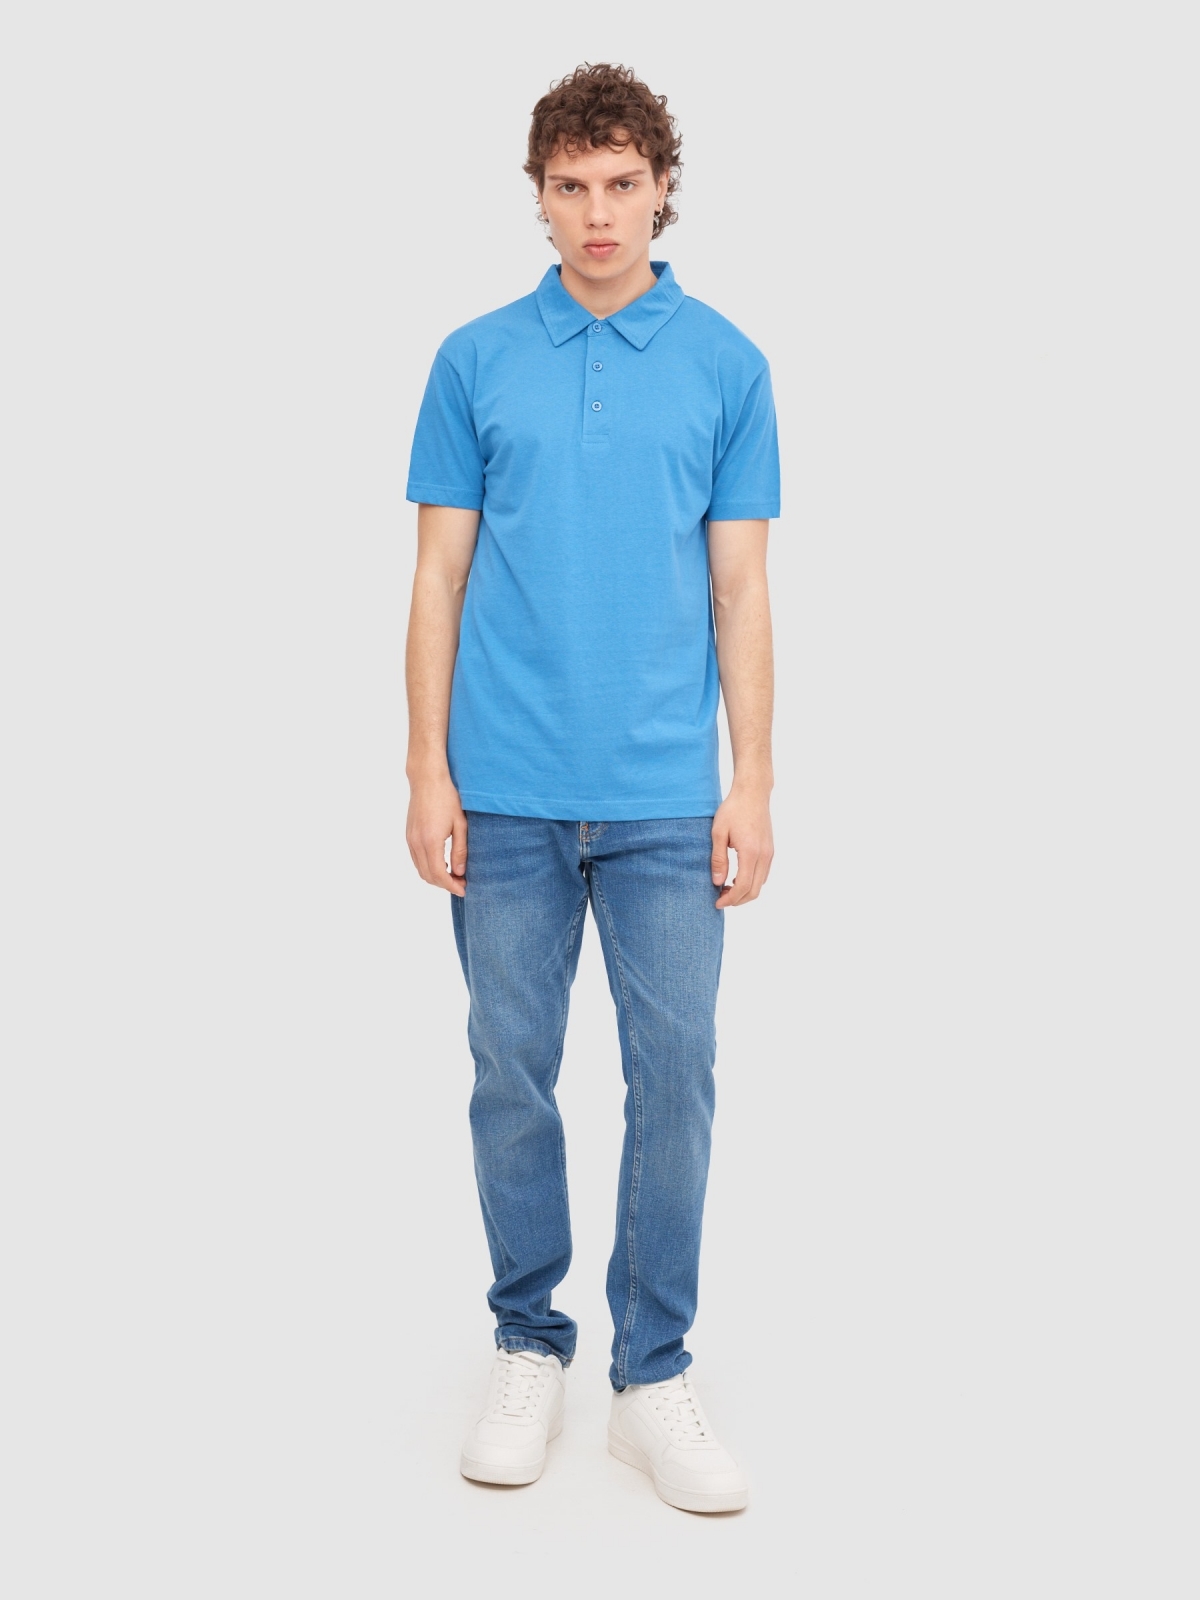 Basic short-sleeved polo shirt blue front view